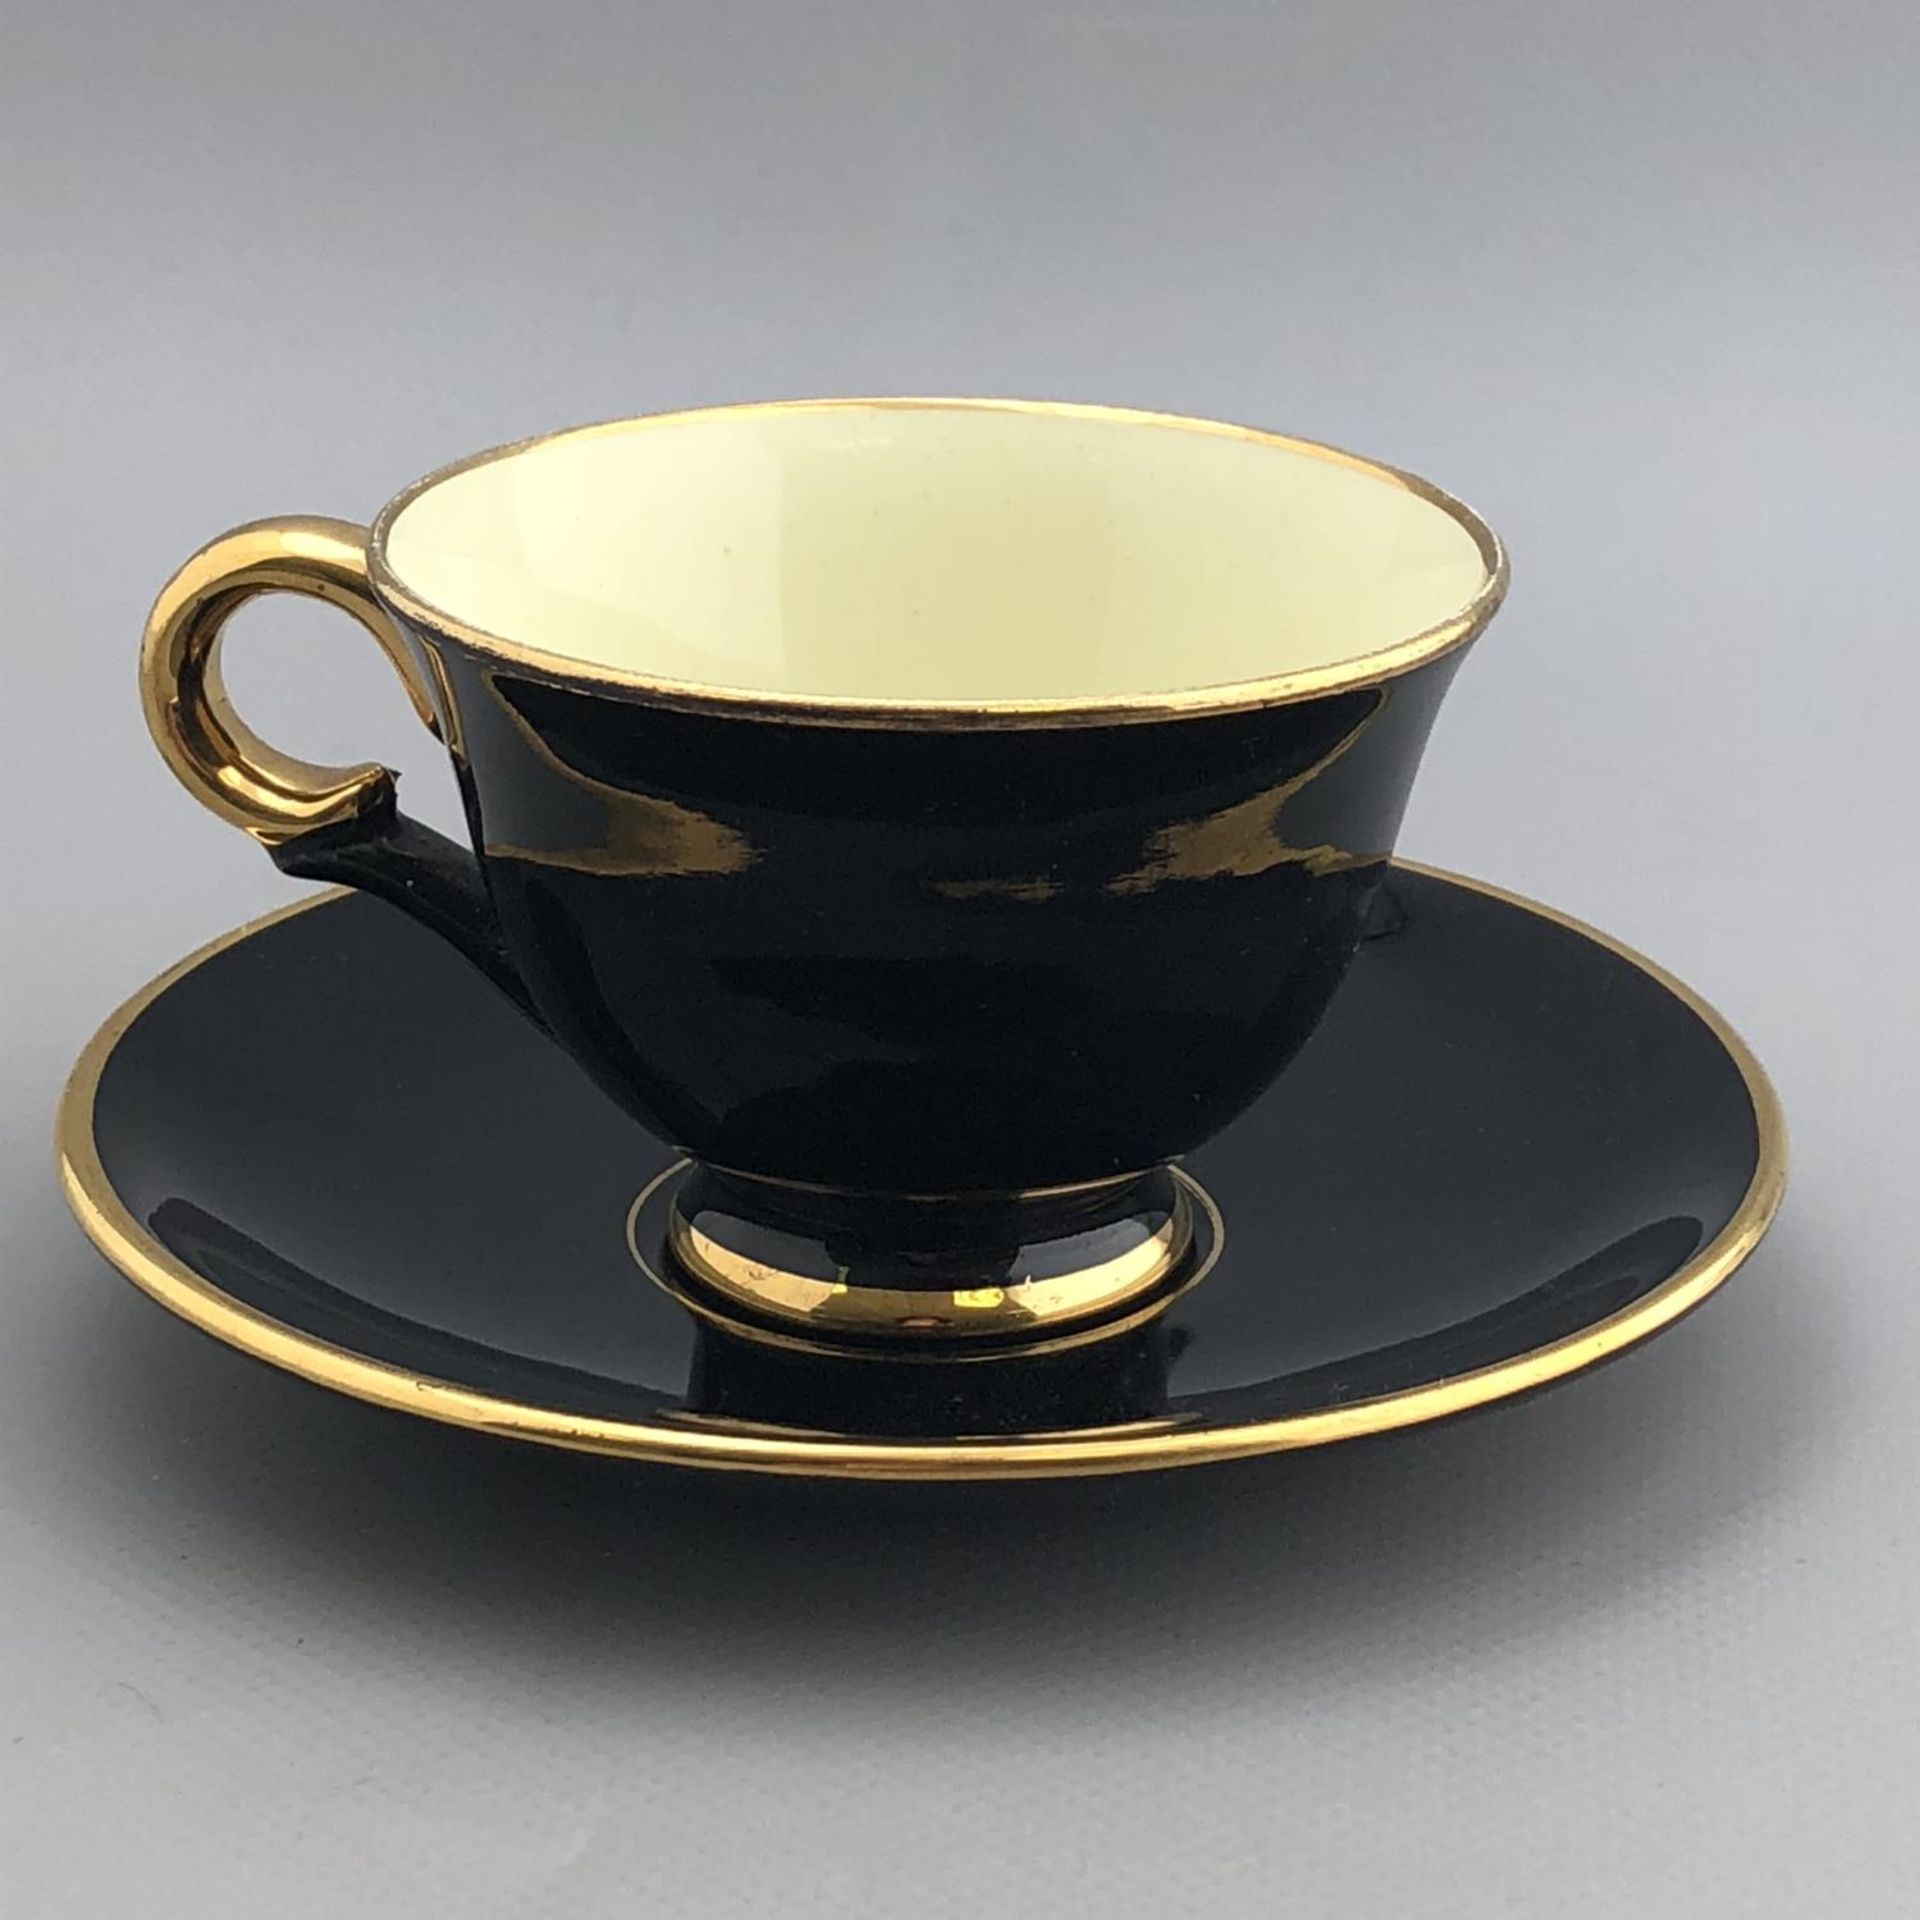 Black & Gilt Porcelain Coffee Cup with Pale Yellow Interior - Stavangerflint - Norway - Image 2 of 3